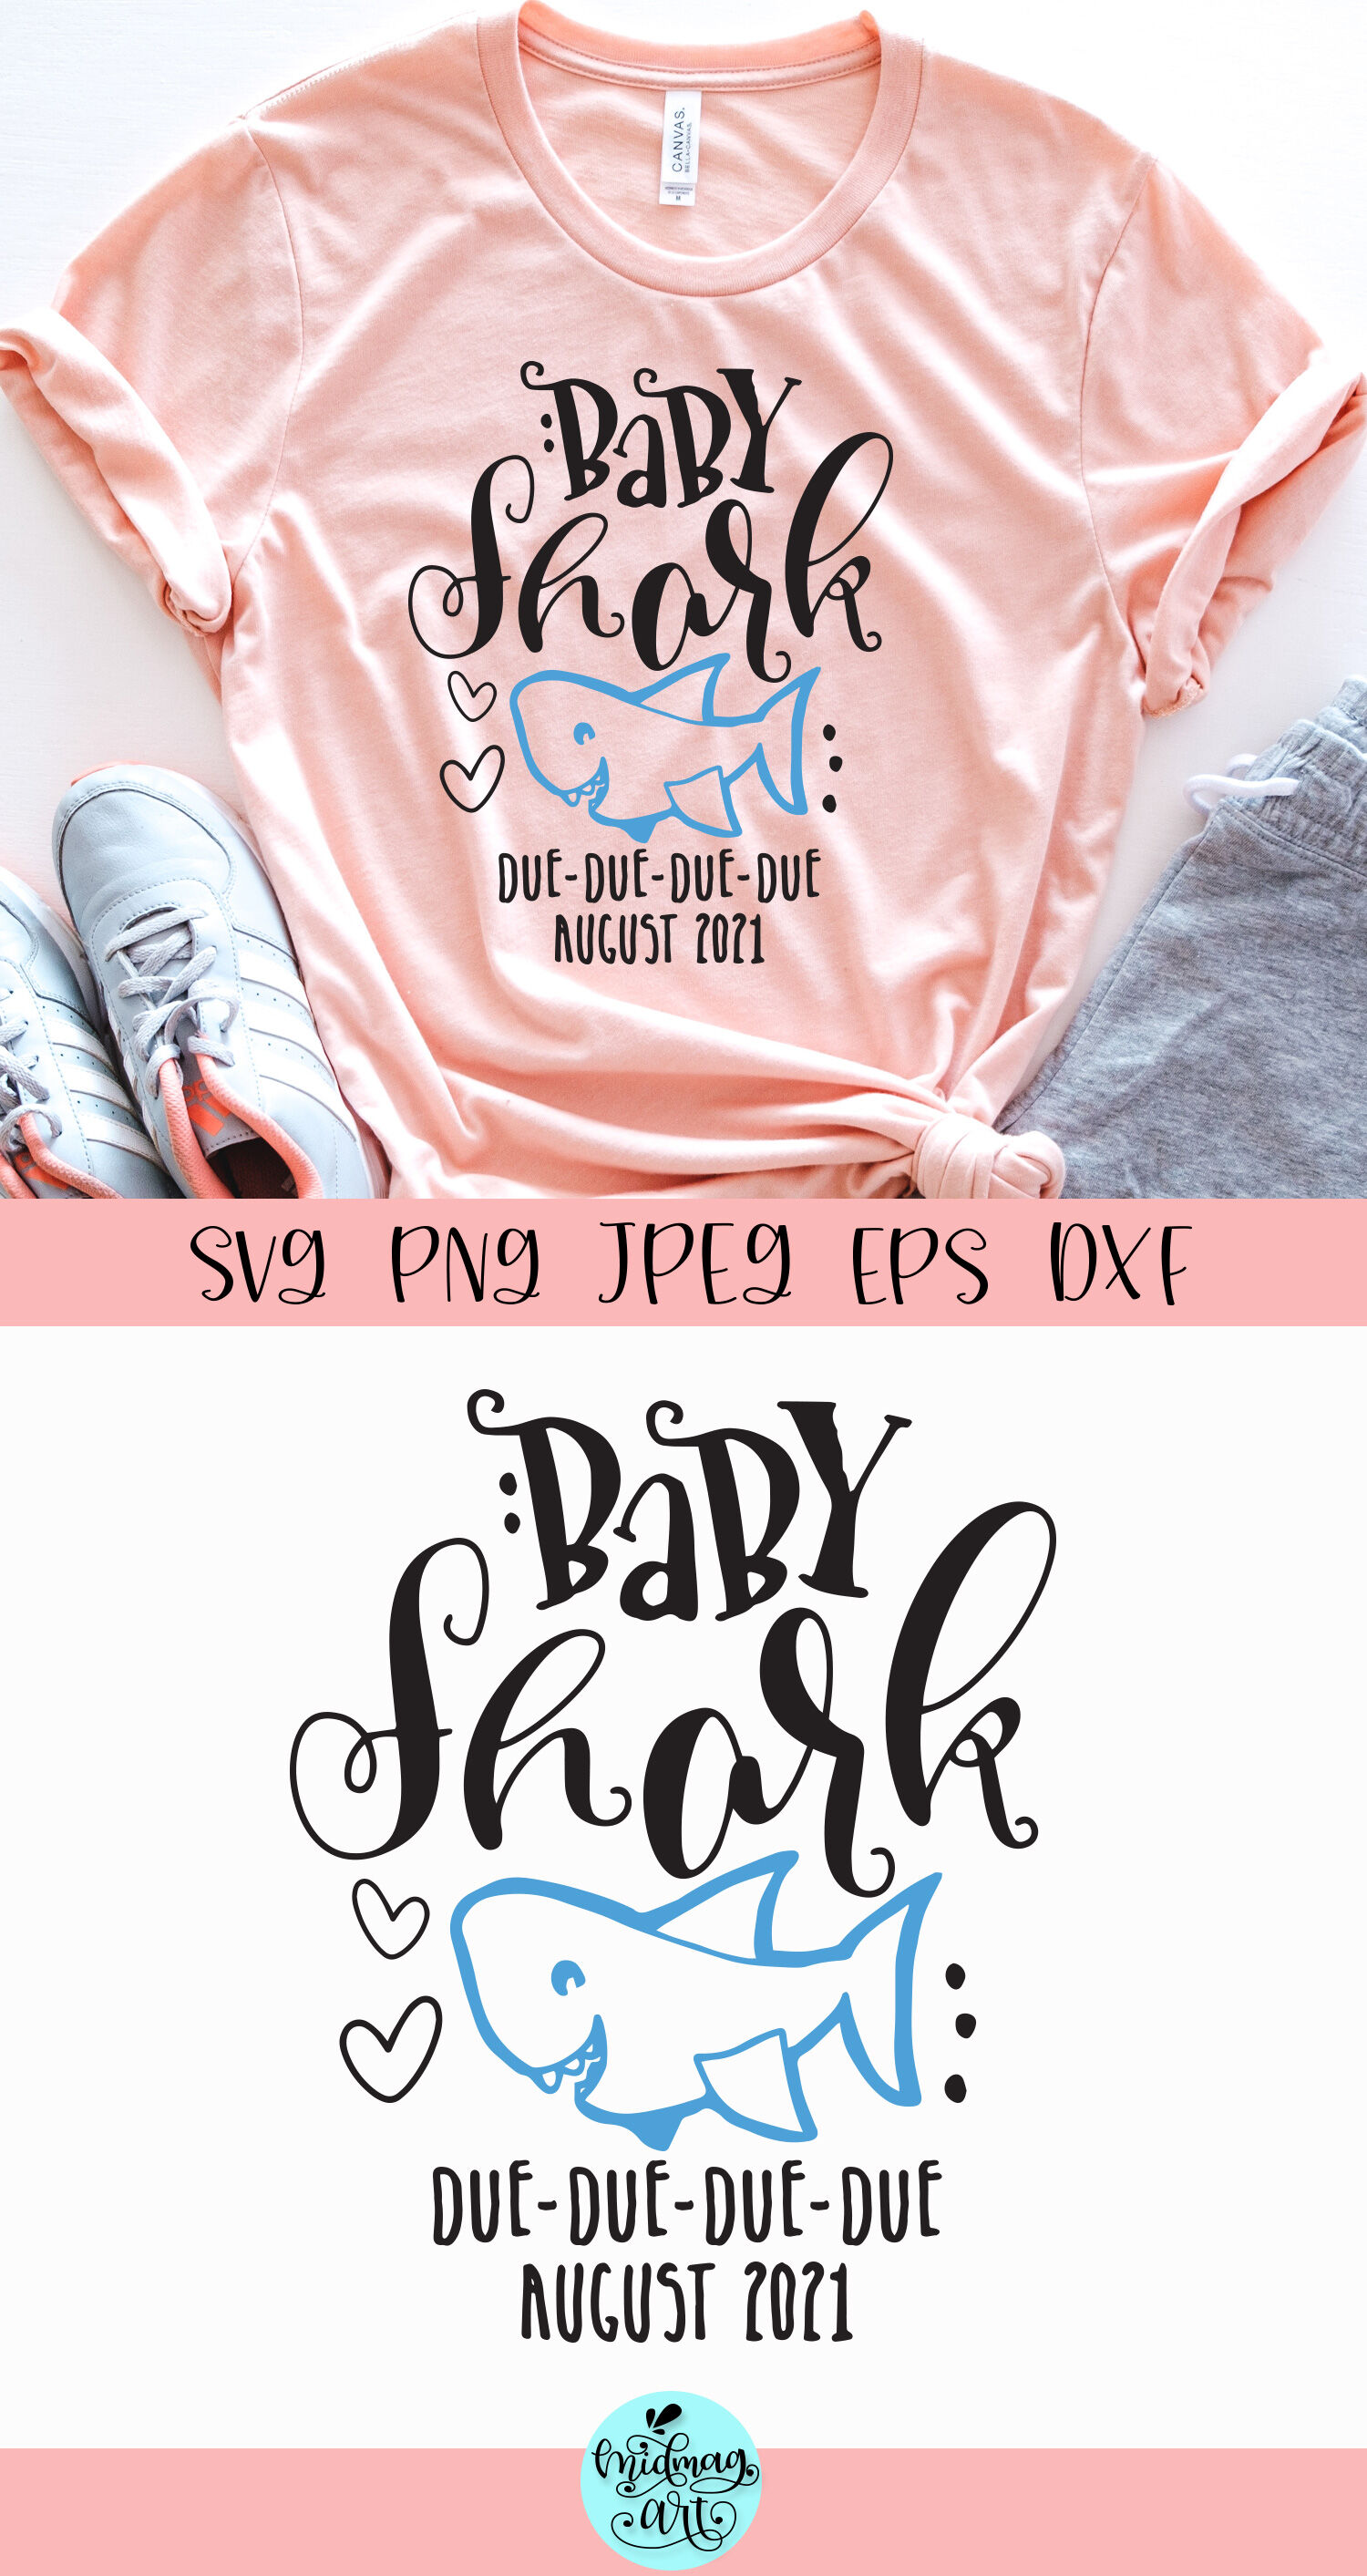 Download Baby shark due august 2021 svg, pregnancy svg By Midmagart ...